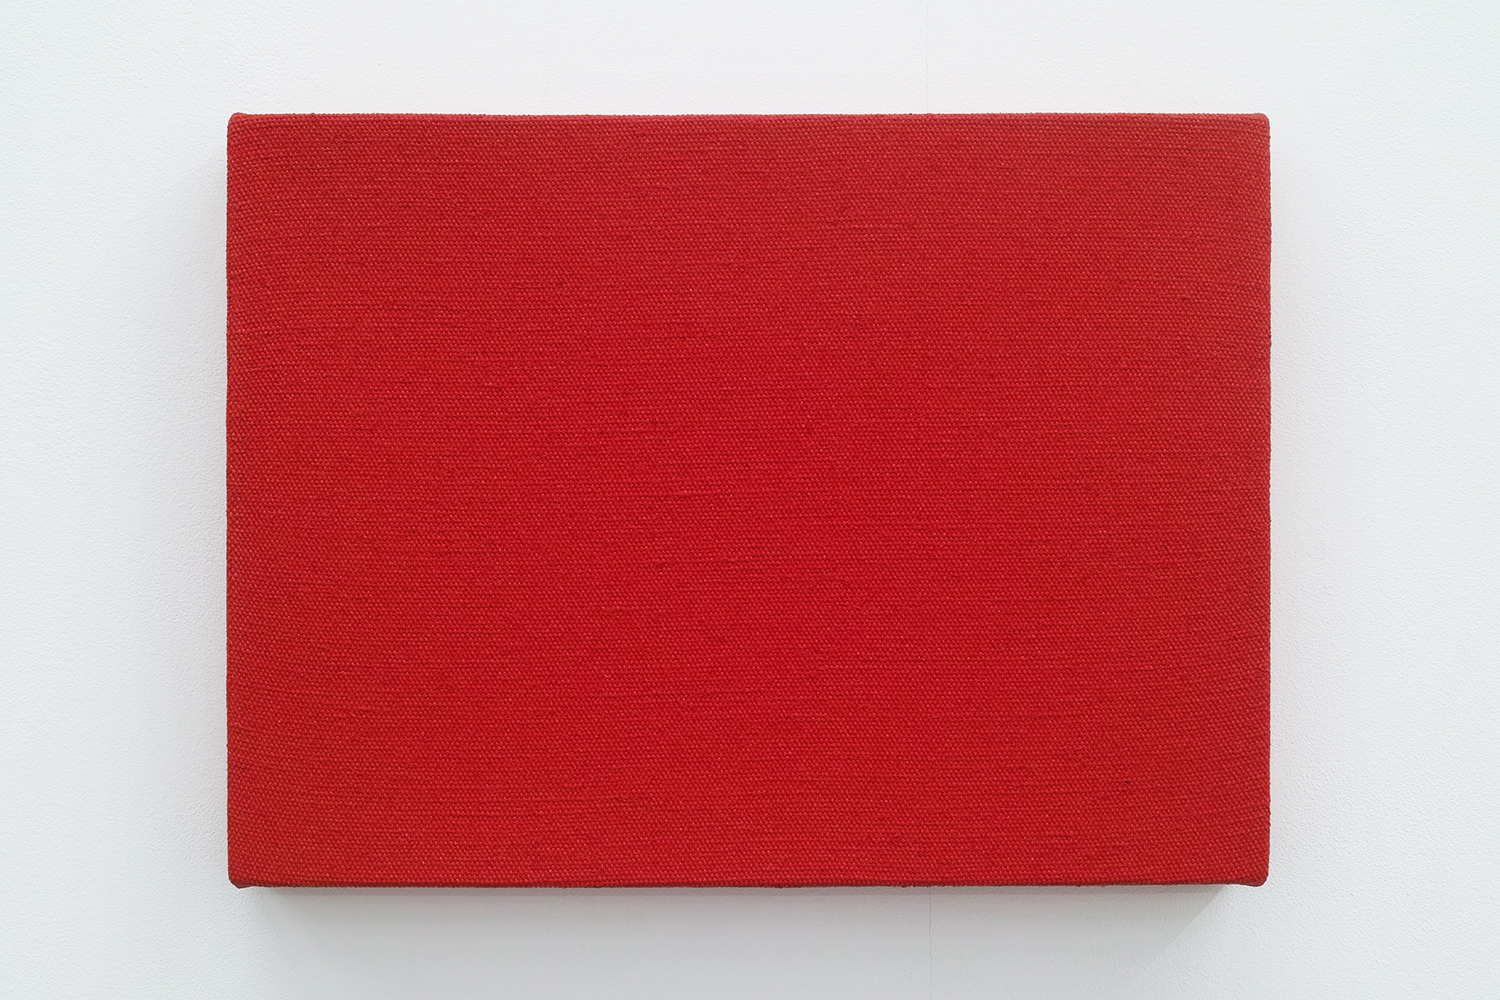 Text No. 663<br>pigment, acrylic, ink on linen,   246 x 333 x 37 mm,  2007